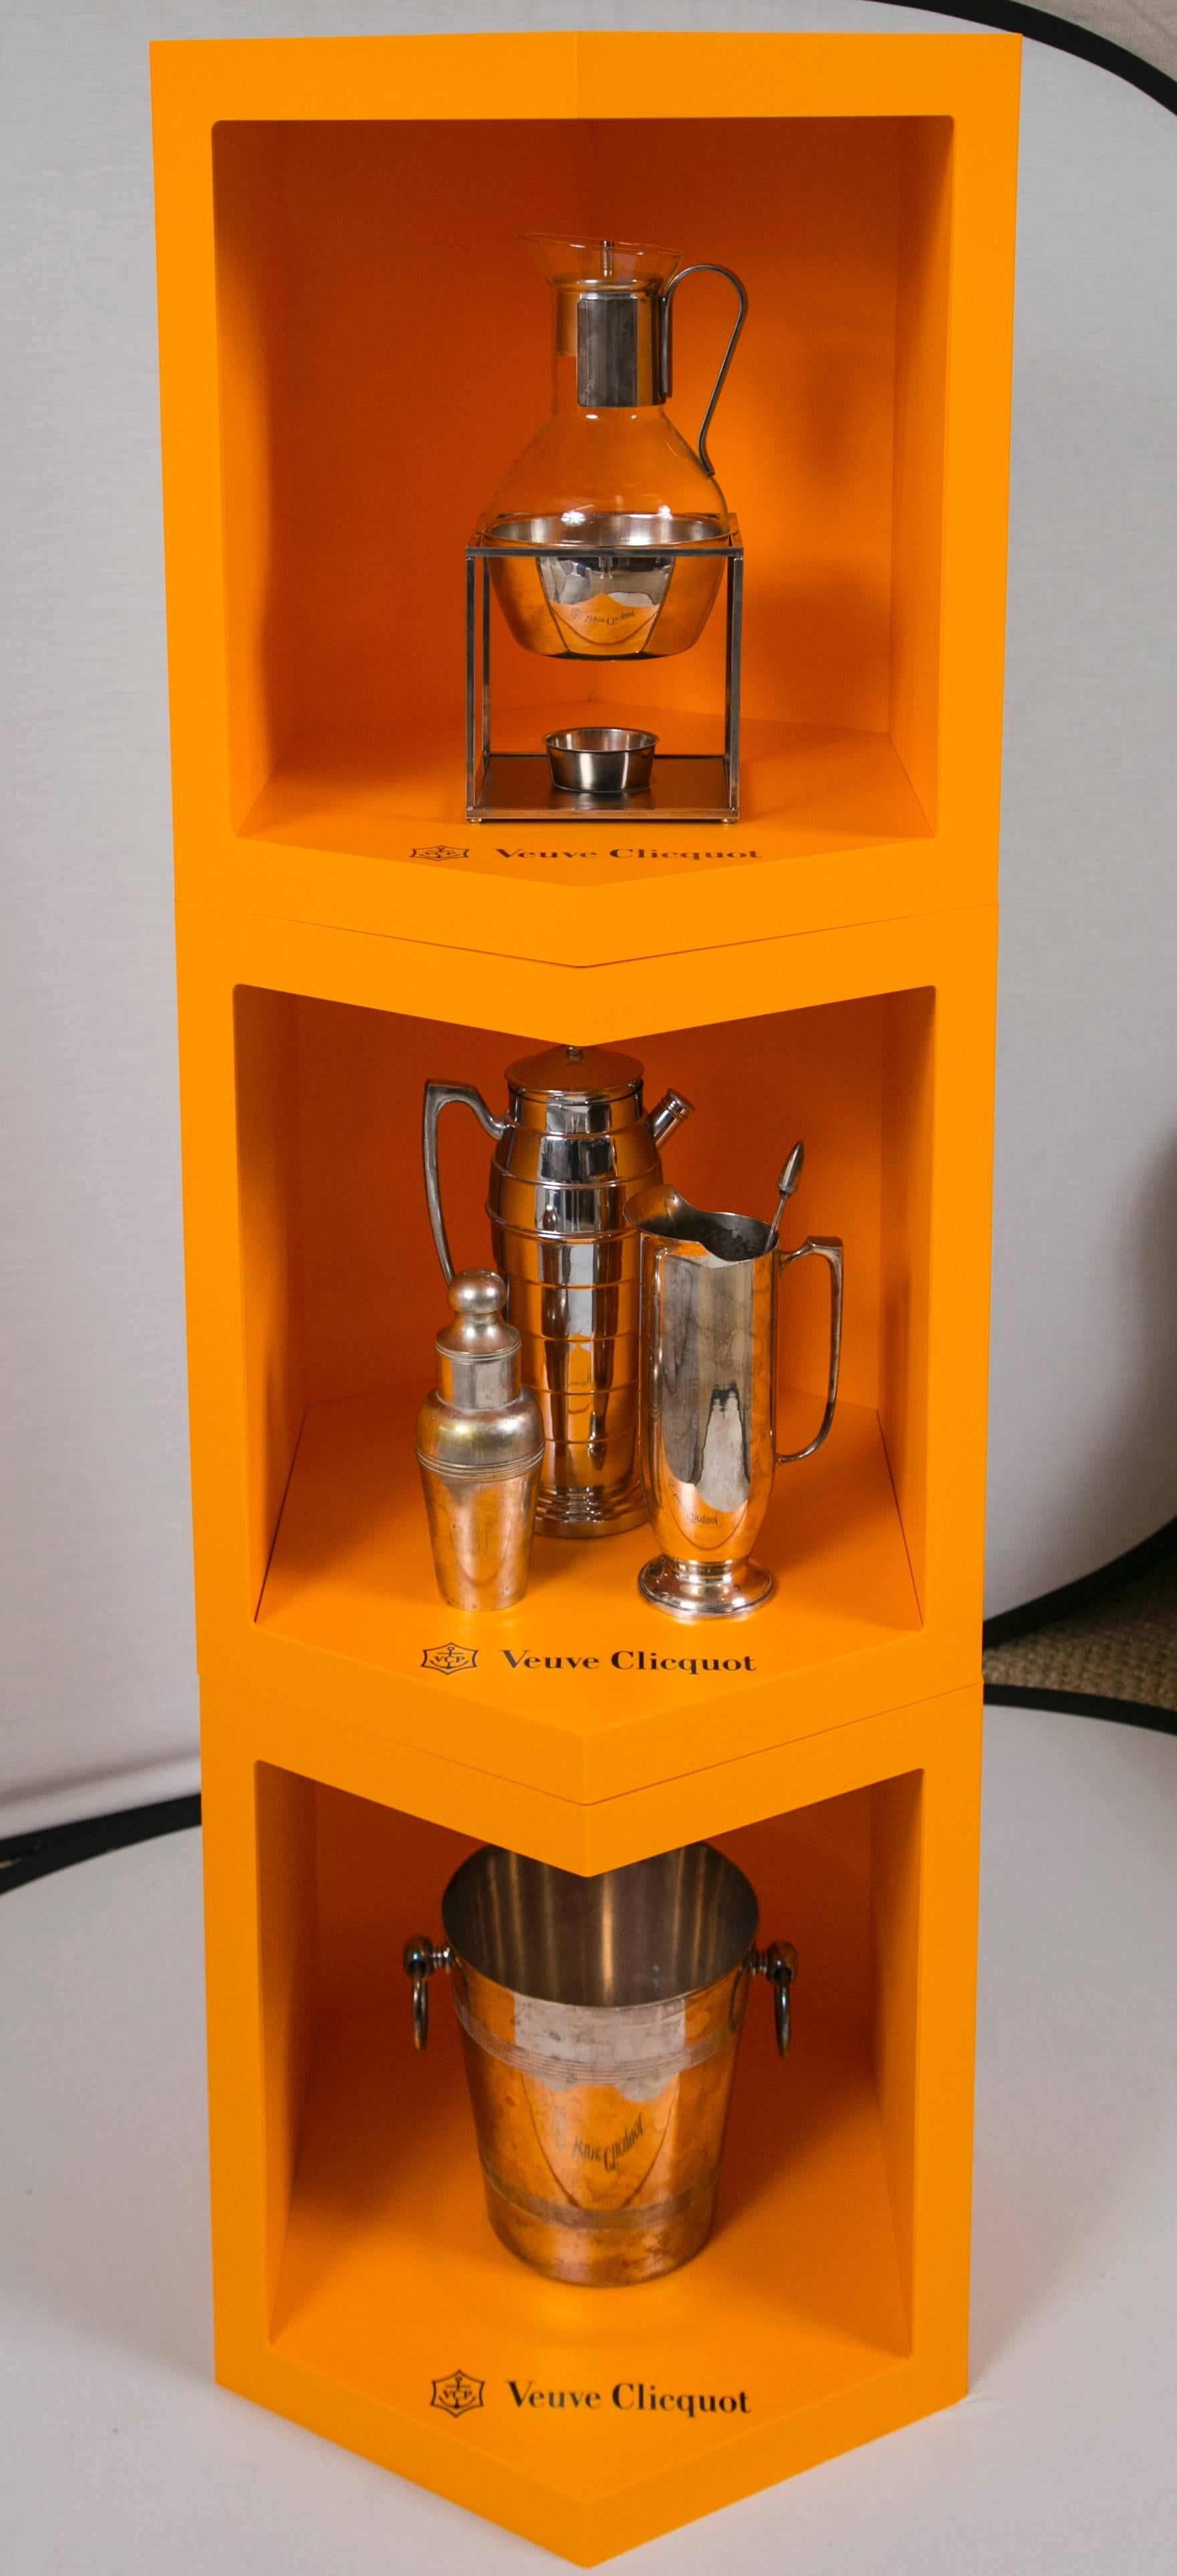 French Veuve Clicquot Promotional Display Boxes, Set of Three